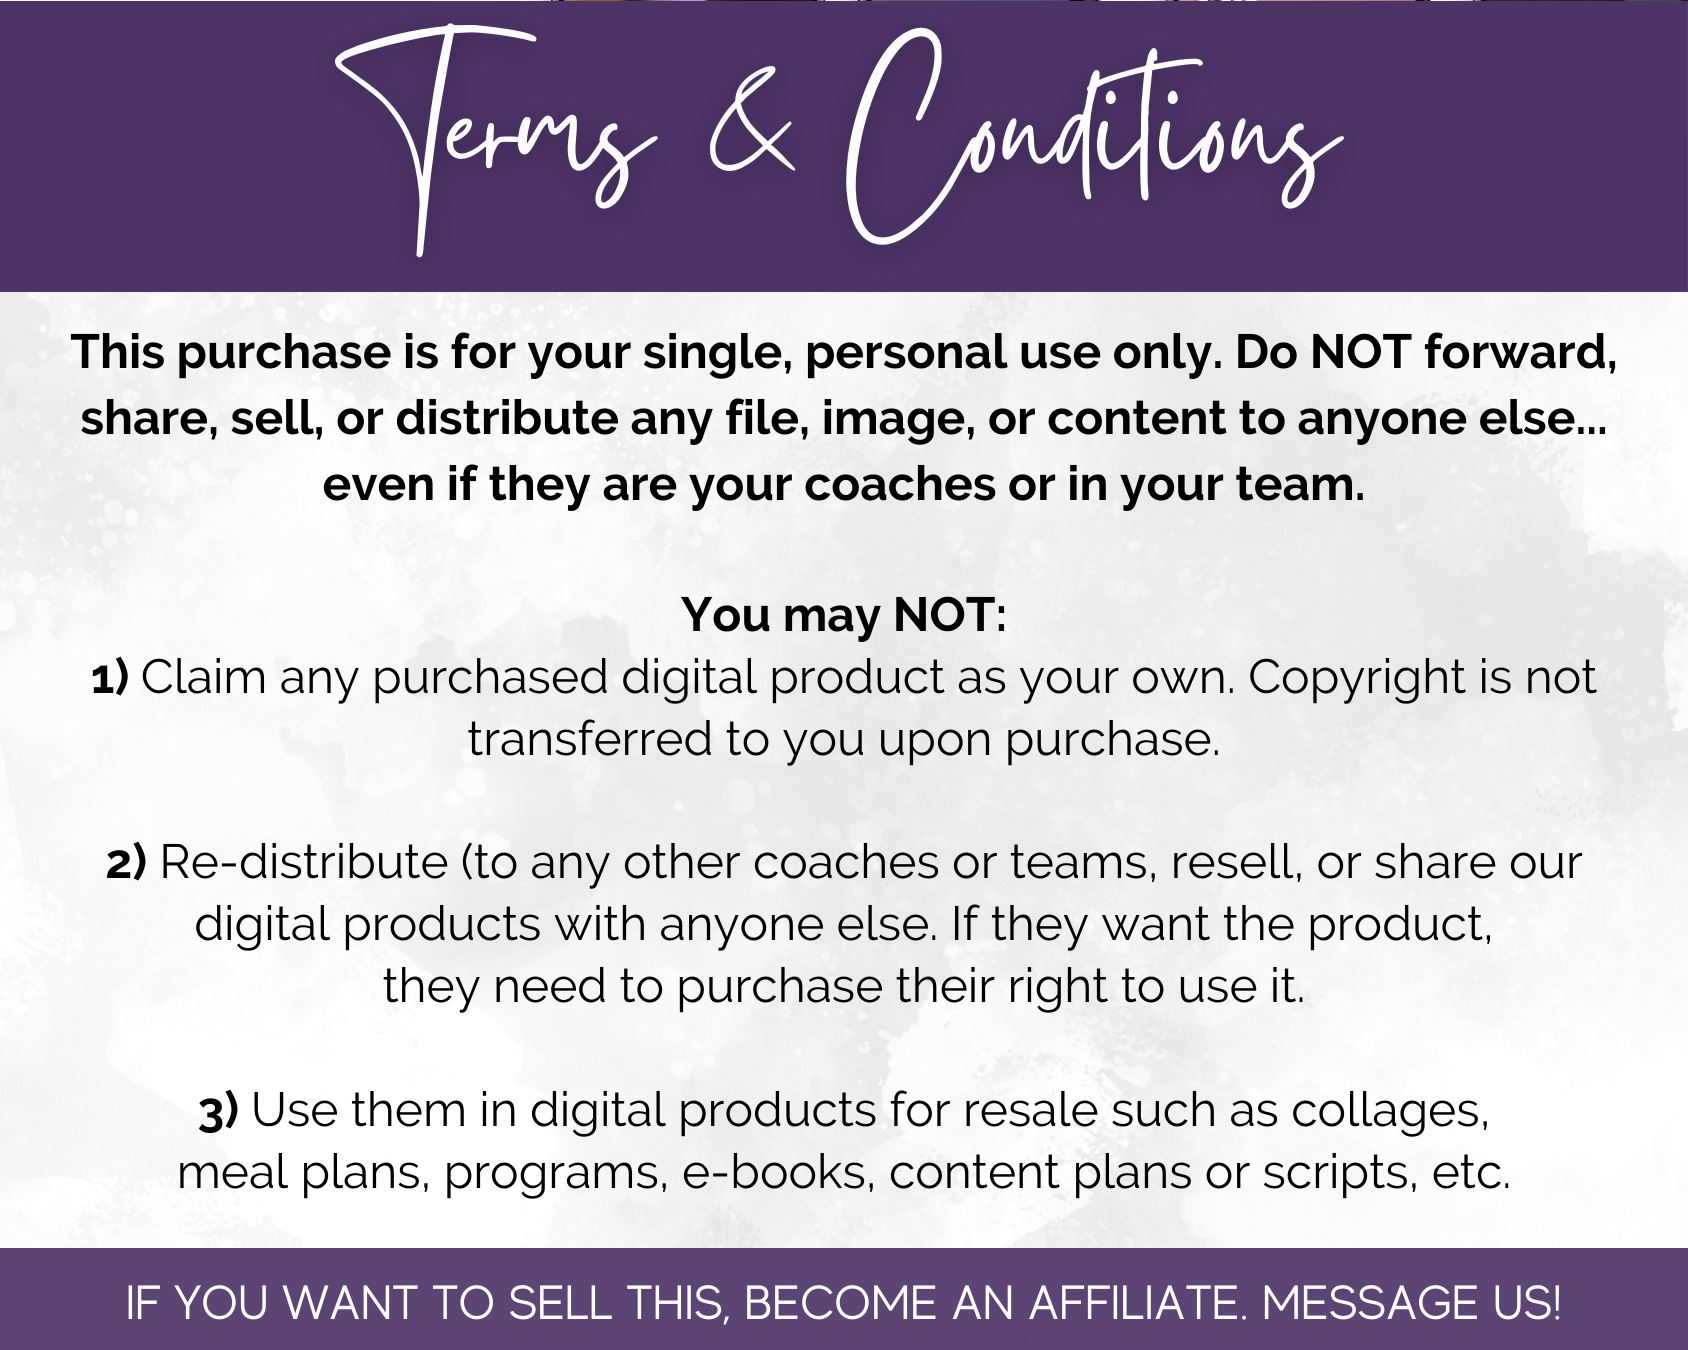 The terms and conditions for the purchase of "March Daily Posting Plan - Your Social Plan" by Get Socially Inclined in social media content.